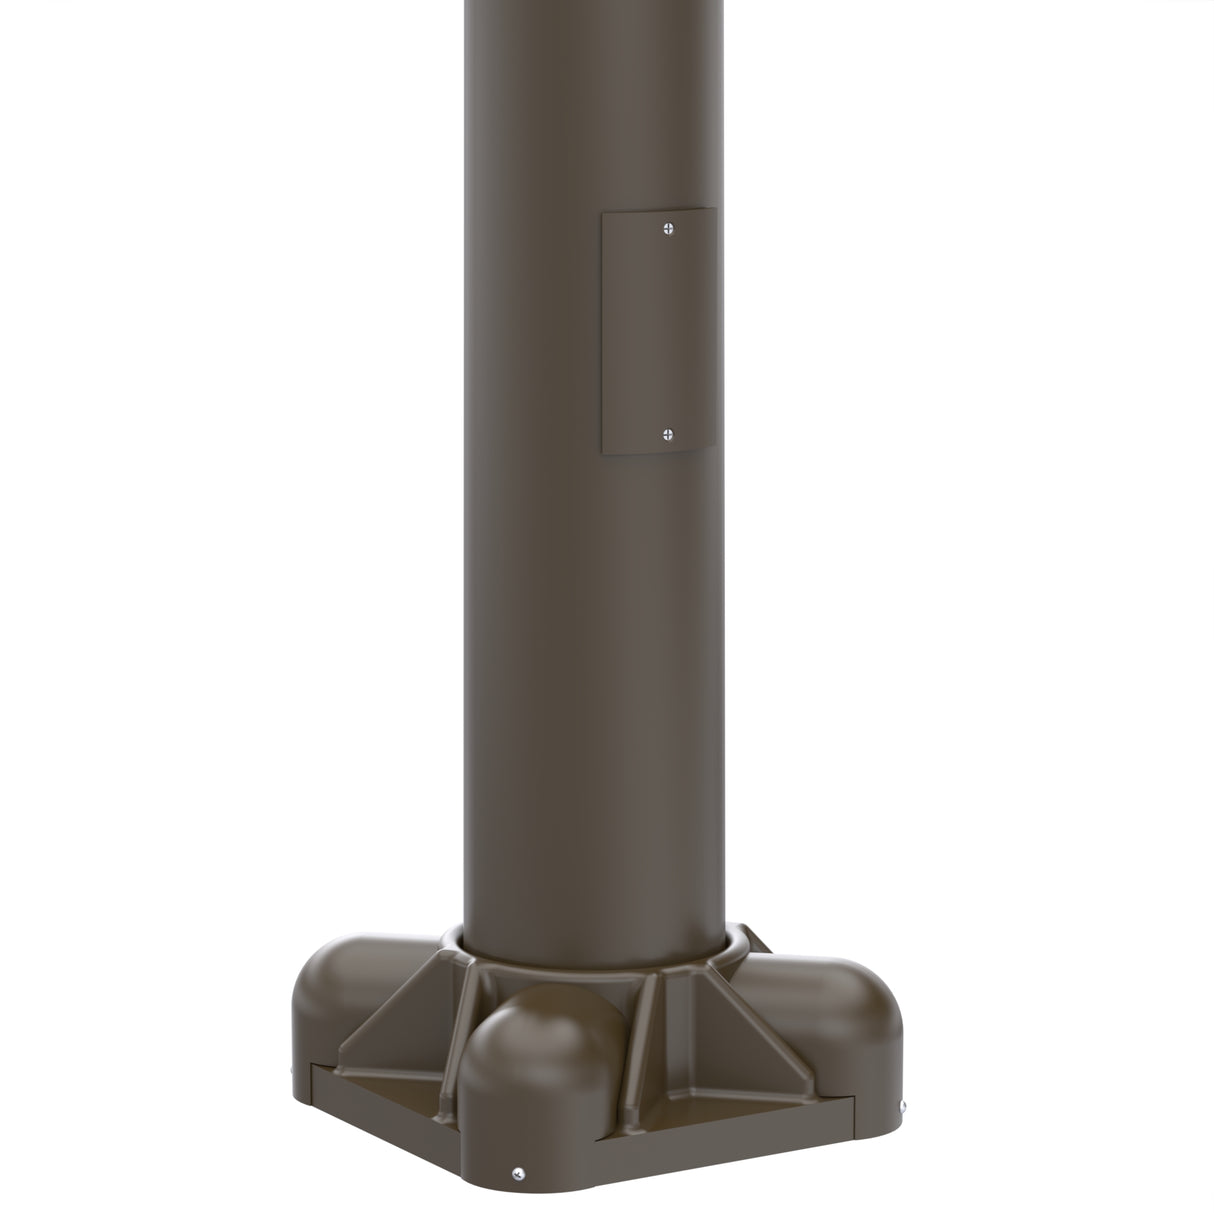 18' Tall x 5.0" Base OD x 3.0" Top OD x 0.156" Thick, Round Tapered Aluminum, Anchor Base Light Pole